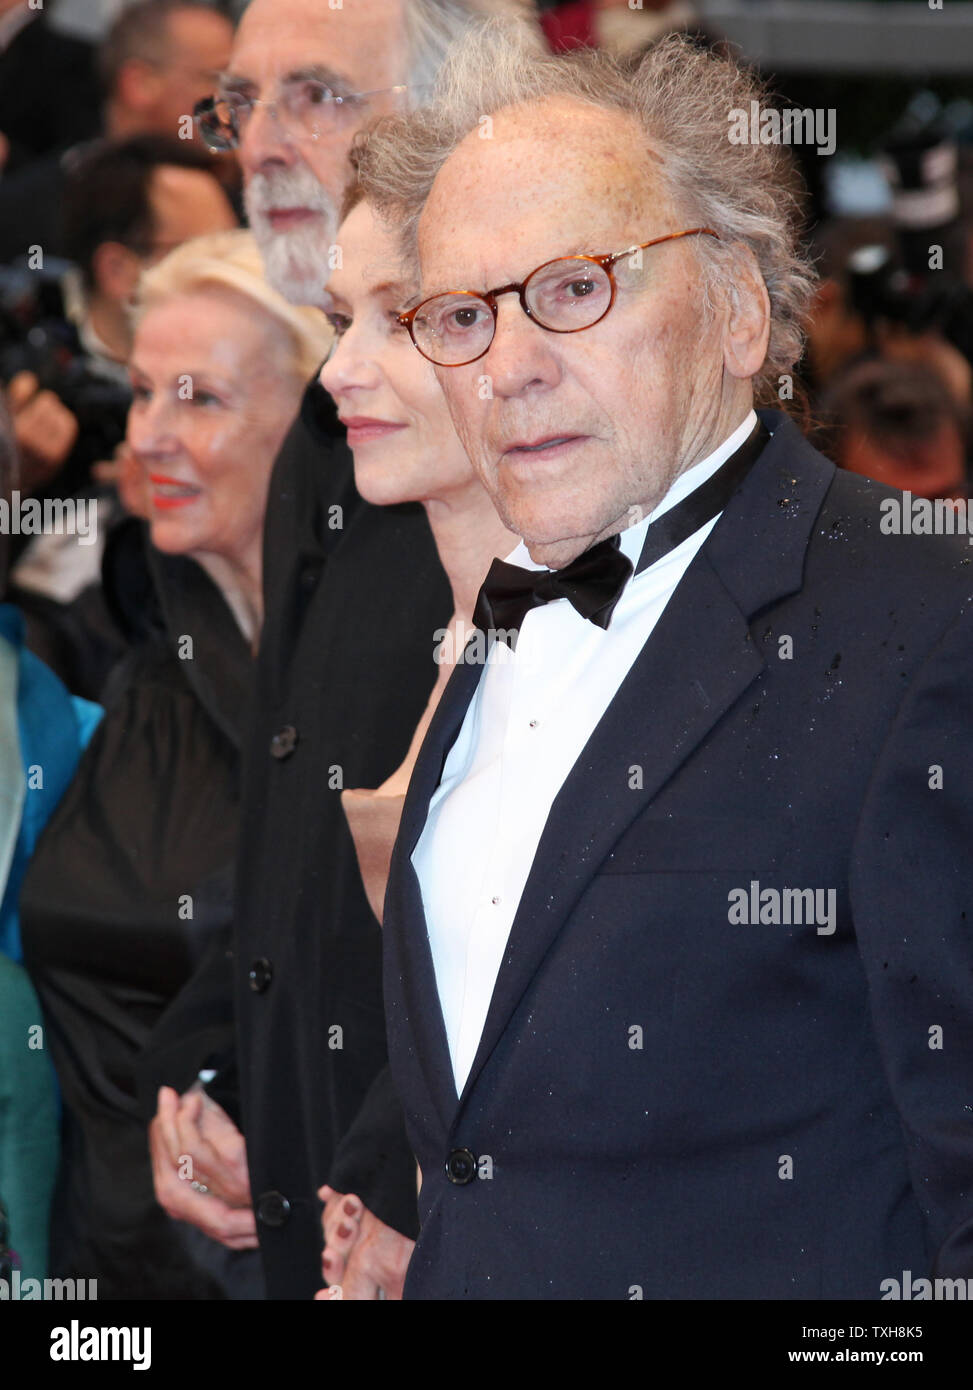 (From R to L) Jean-Louis Trintignant, Isabelle Huppert, Michael Haneke and his wife Susanne arrive on the red carpet before the screening of the film 'Amour' during the 65th annual Cannes International Film Festival in Cannes, France on May 20, 2012.  UPI/David Silpa Stock Photo